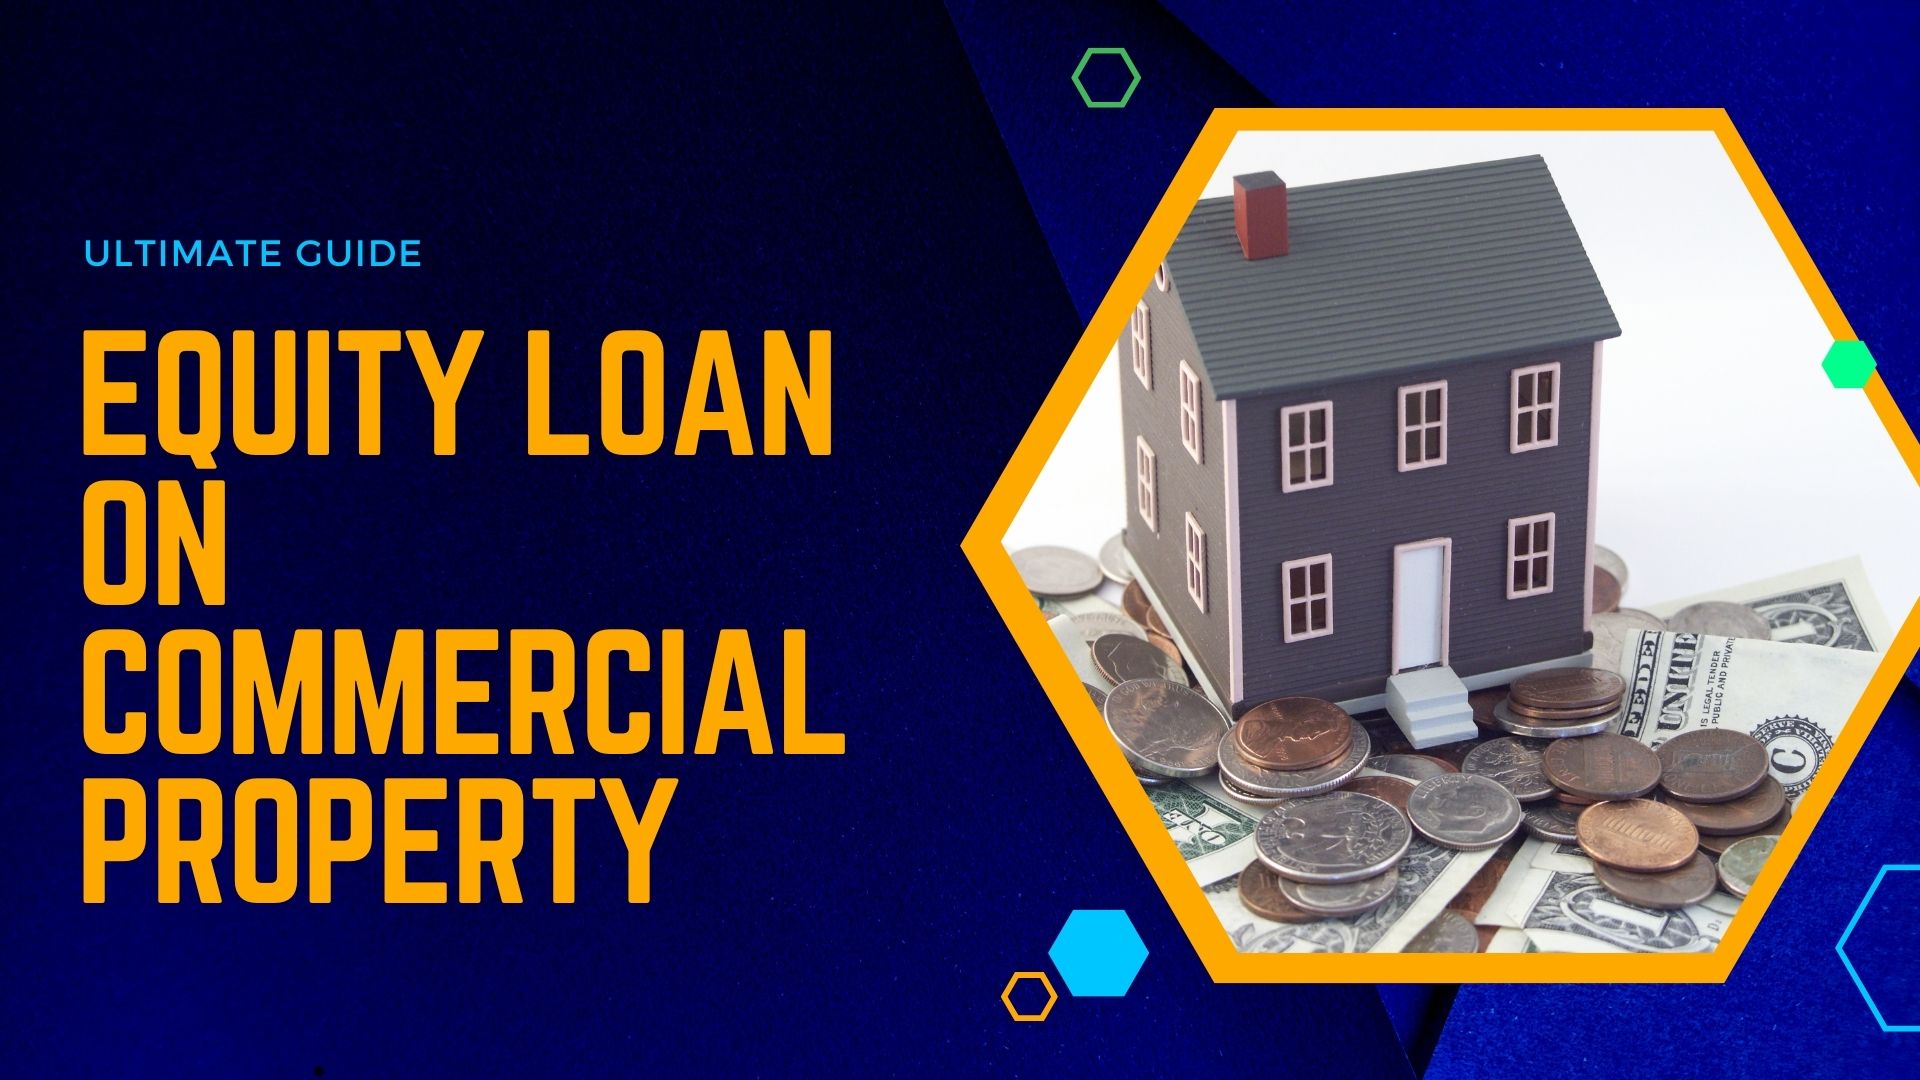 Can You Get an Equity Loan on Commercial Property